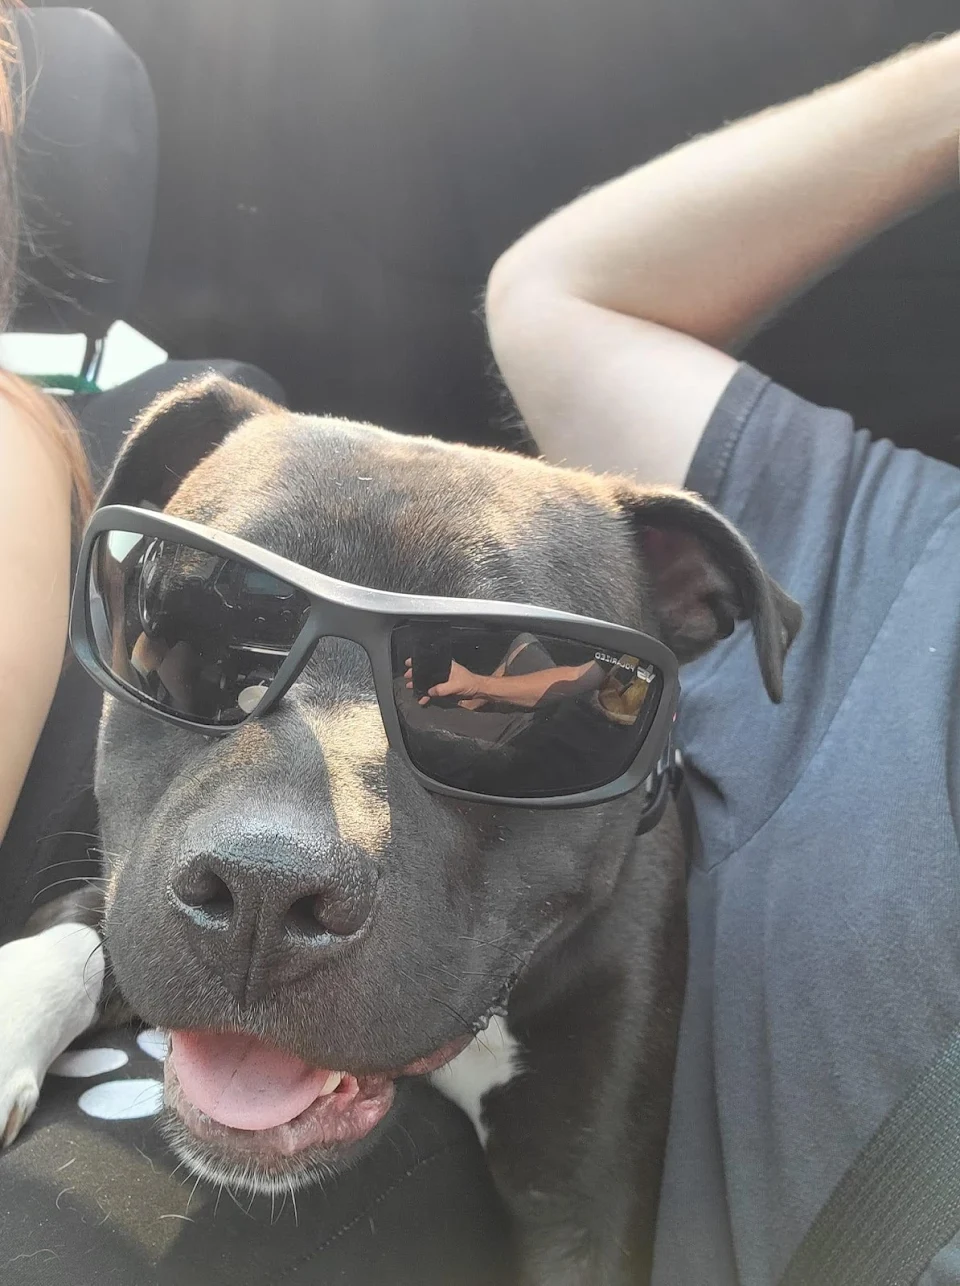 My rescue black pittie is the coolest! It is beyond me why she was thrown out of a moving car?